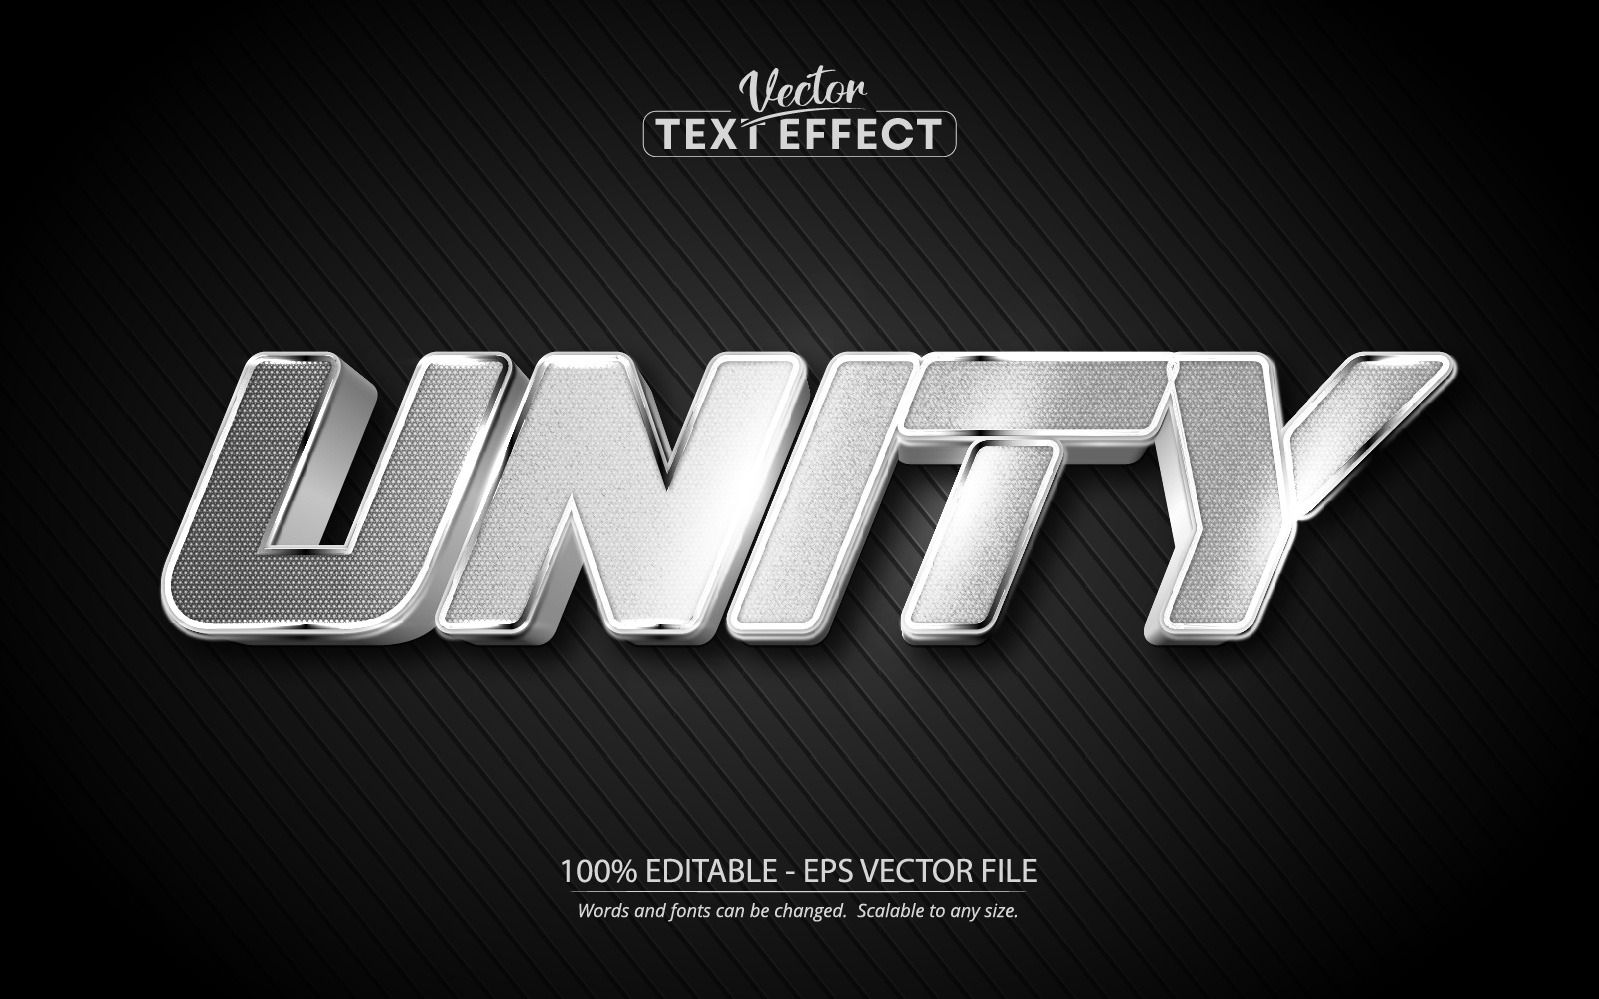 Unity - Editable Text Effect, Rock and Fracture Metallic Silver Text Style, Graphics Illustration